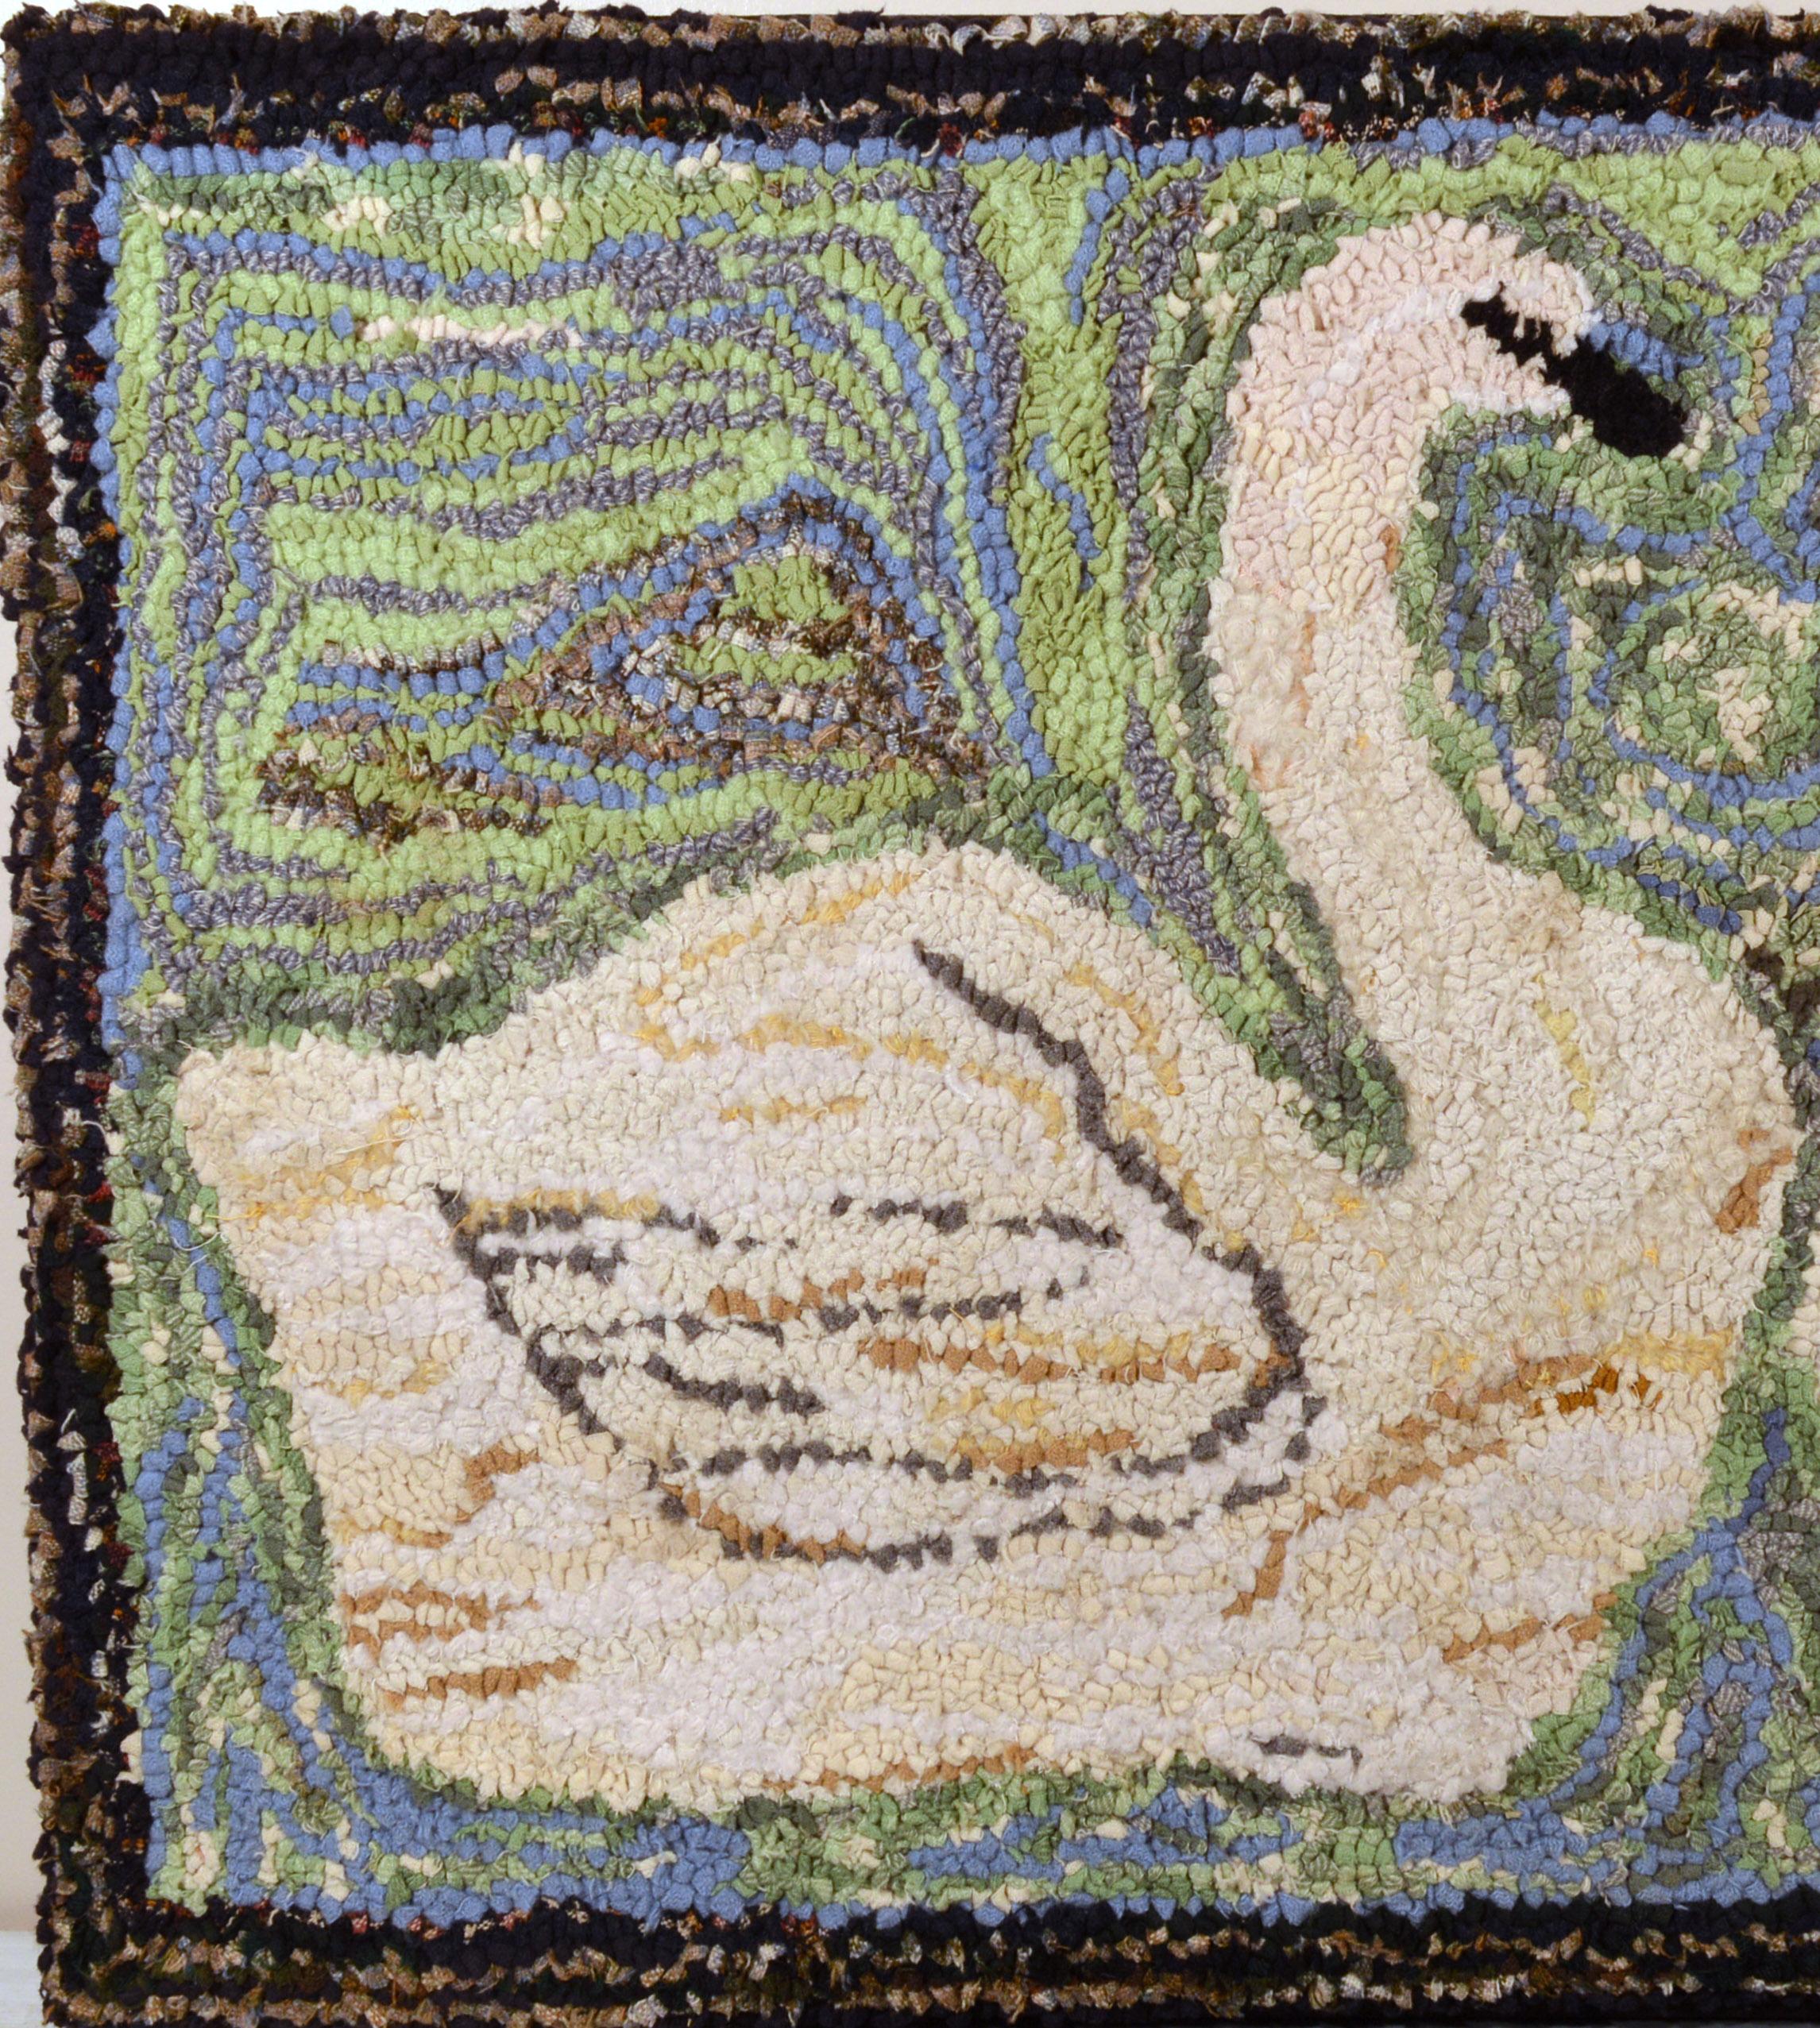 Folk Art American Hooked Rug with a Pair of Swans